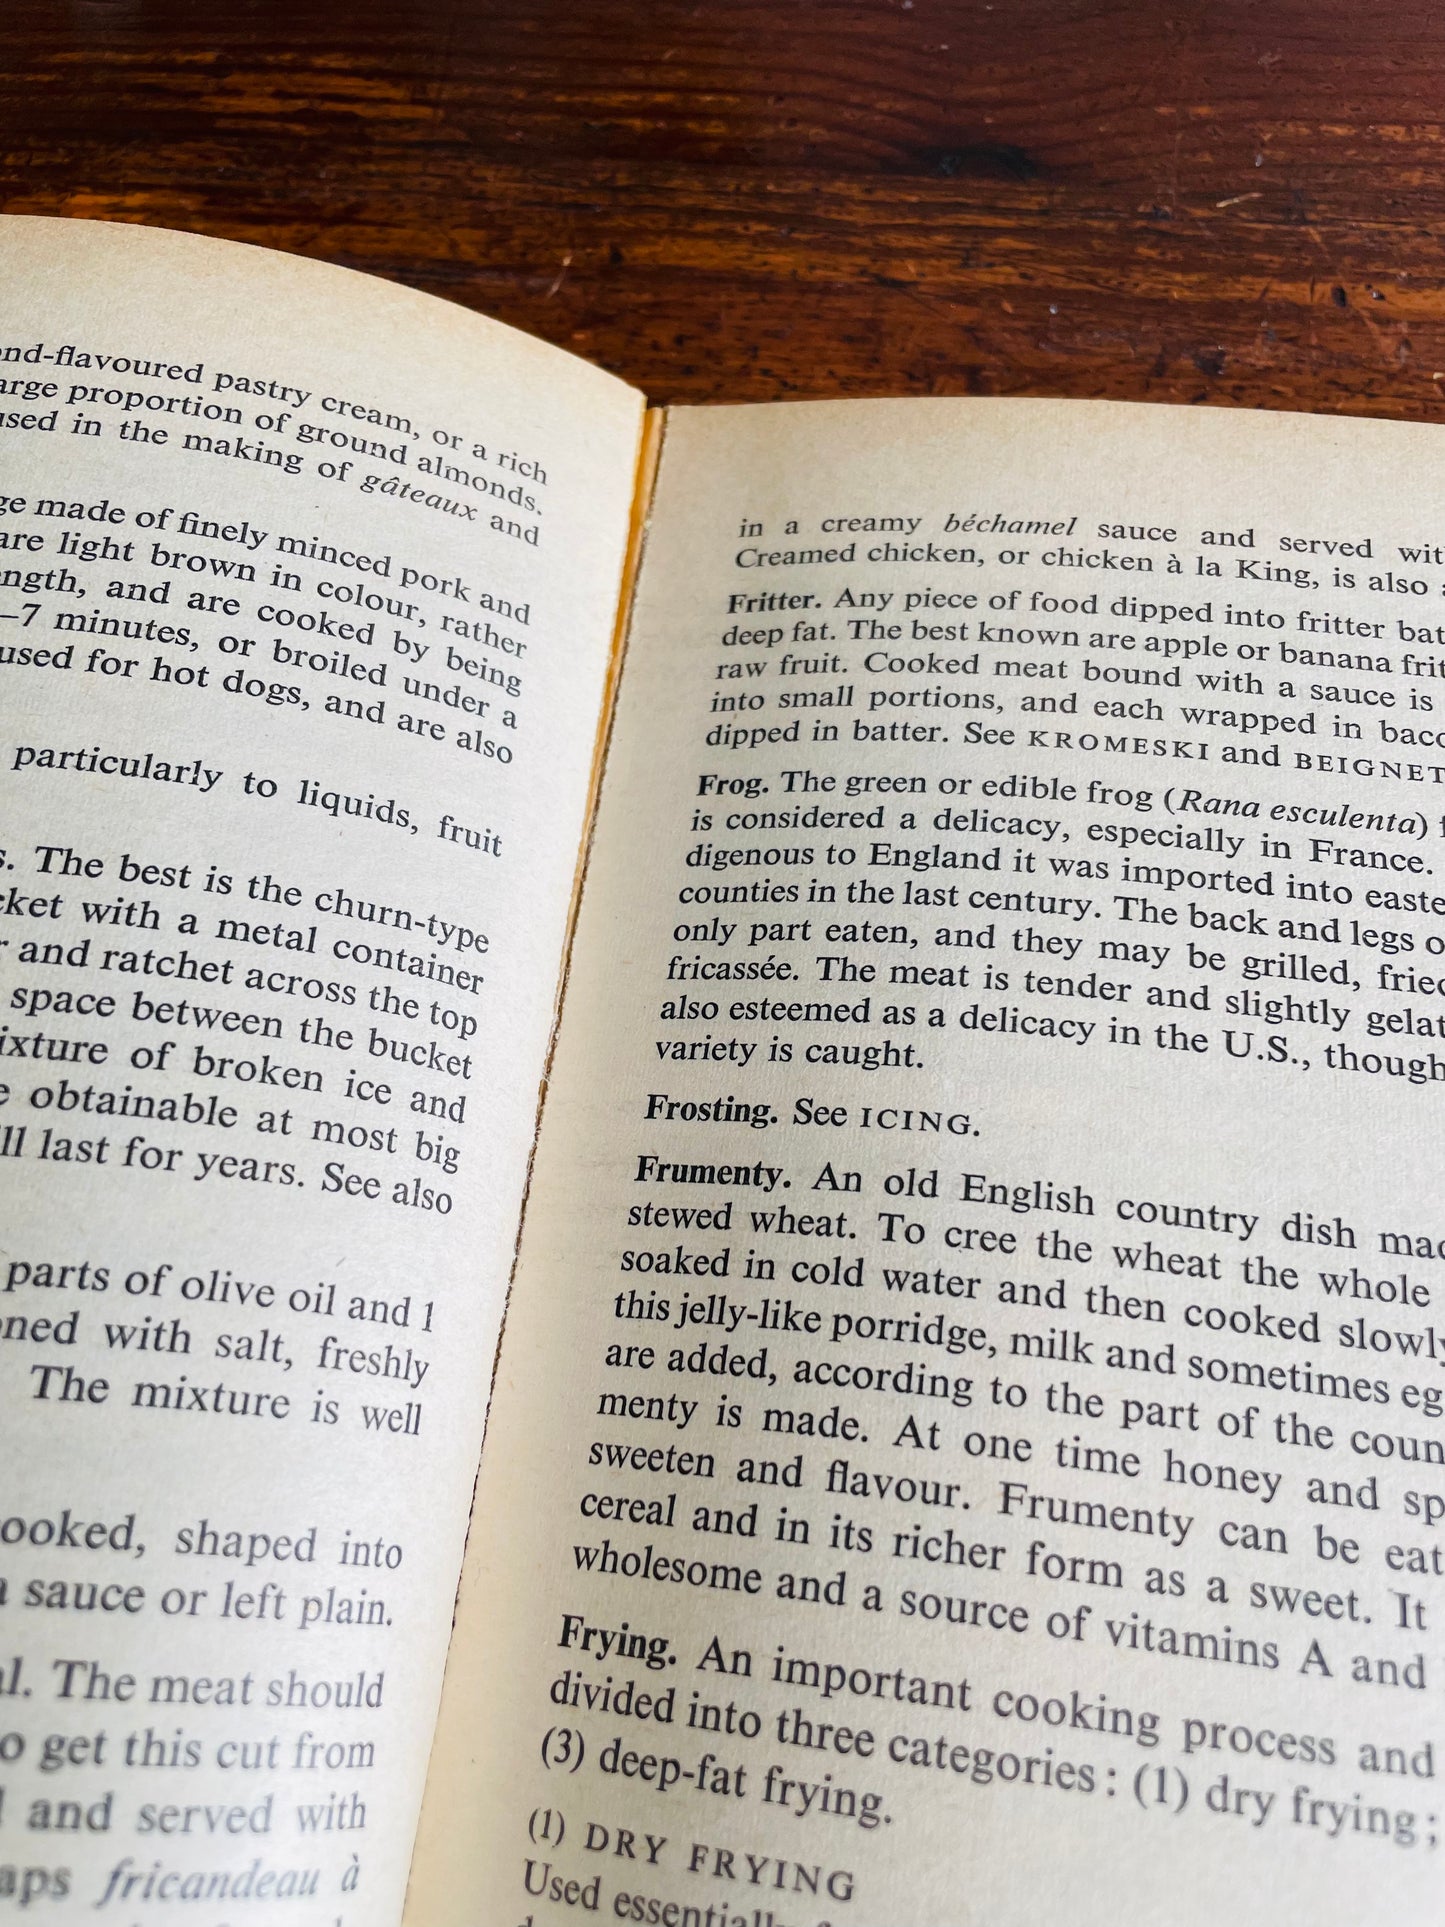 The Penguin Dictionary of Cookery Book by Rosemary Hume & Muriel Downes (1966)